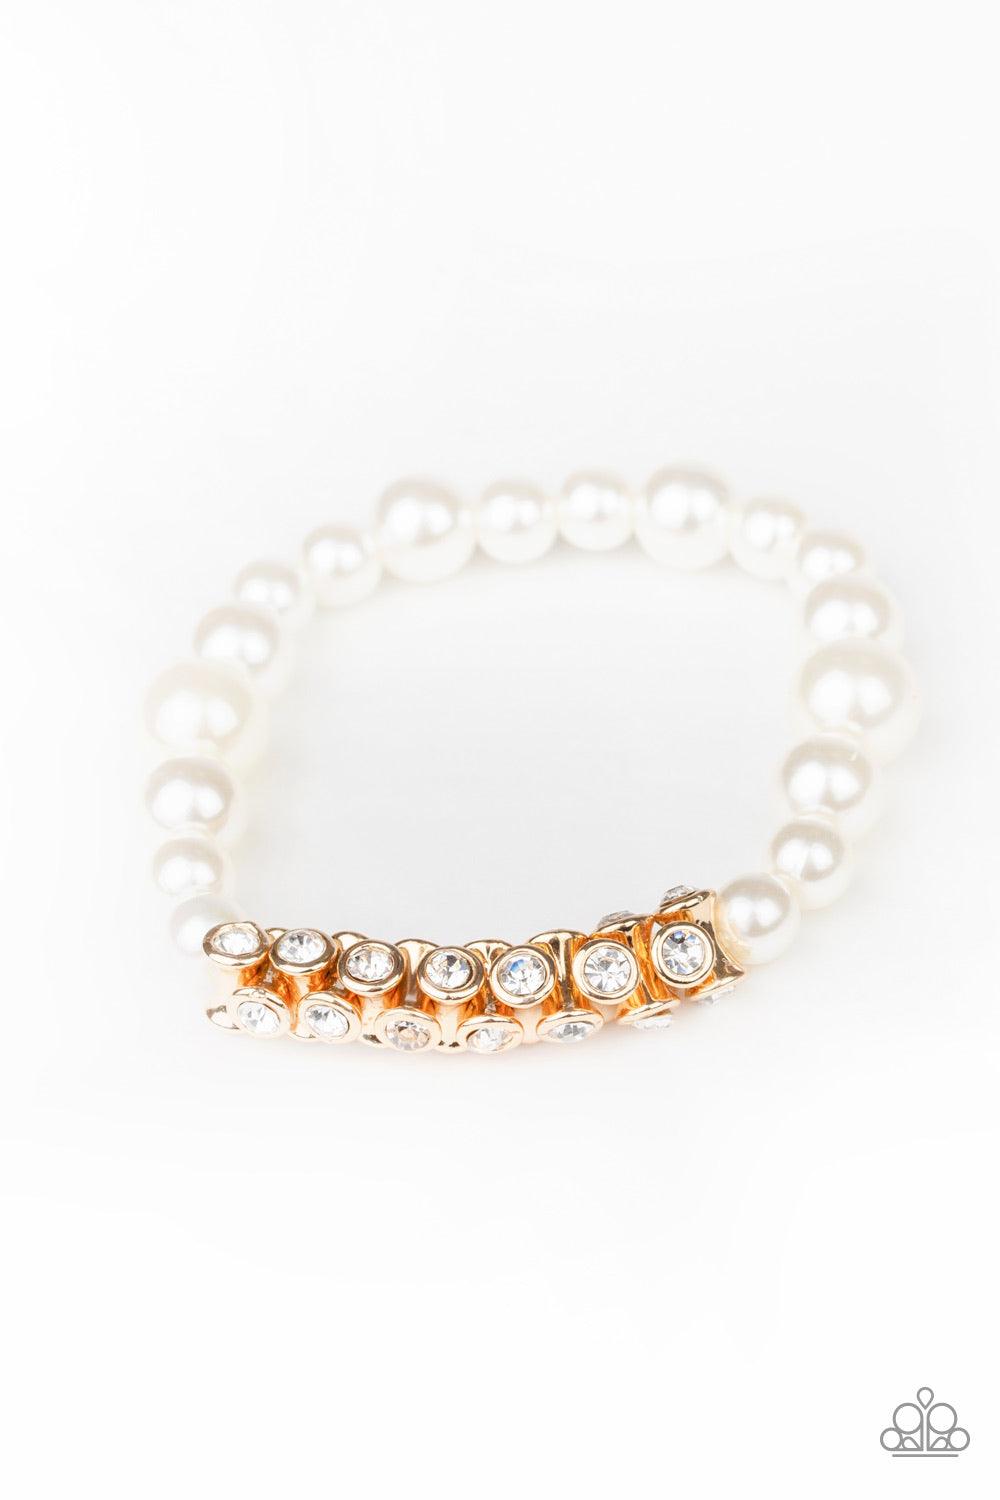 Paparazzi Accessories Traffic-Stopping Sparkle - Gold A collection of white pearls and white rhinestone dotted gold frames are threaded along stretchy bands around the wrist, creating a sparkling centerpiece. Jewelry